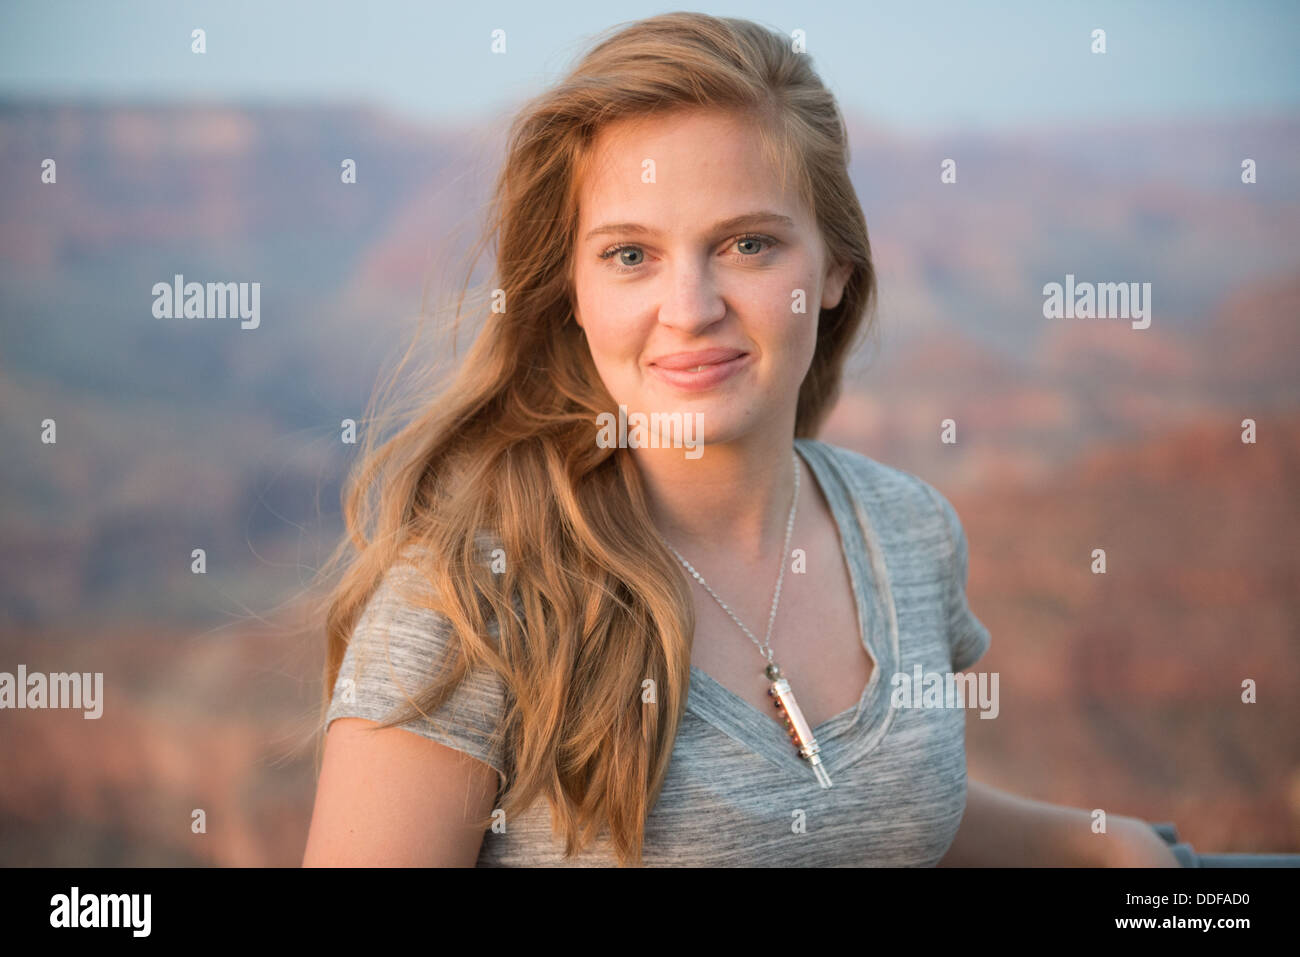 Grand Canyon Portrait of a Young Woman Stock Photo